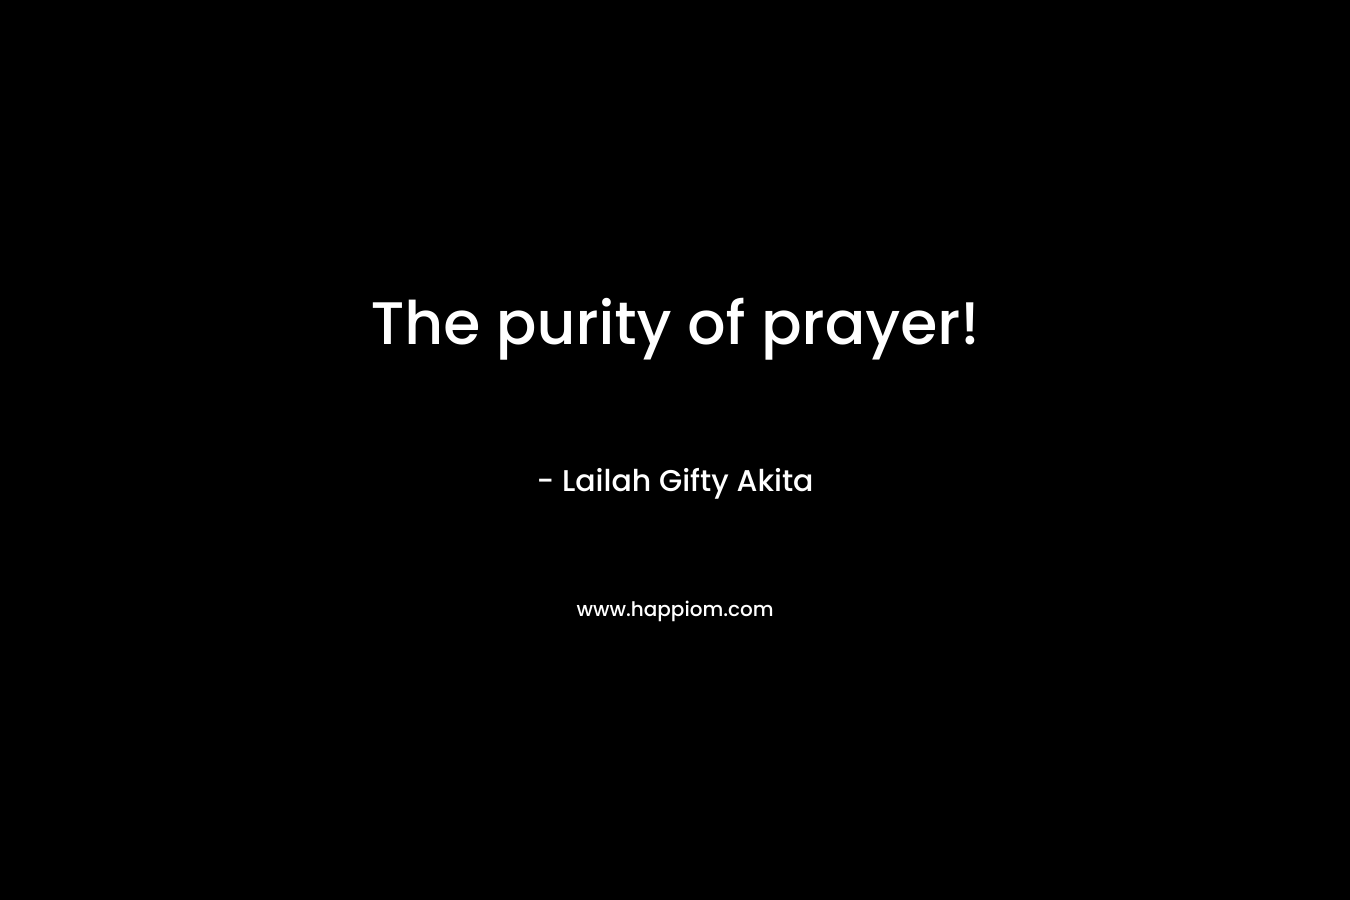 The purity of prayer!